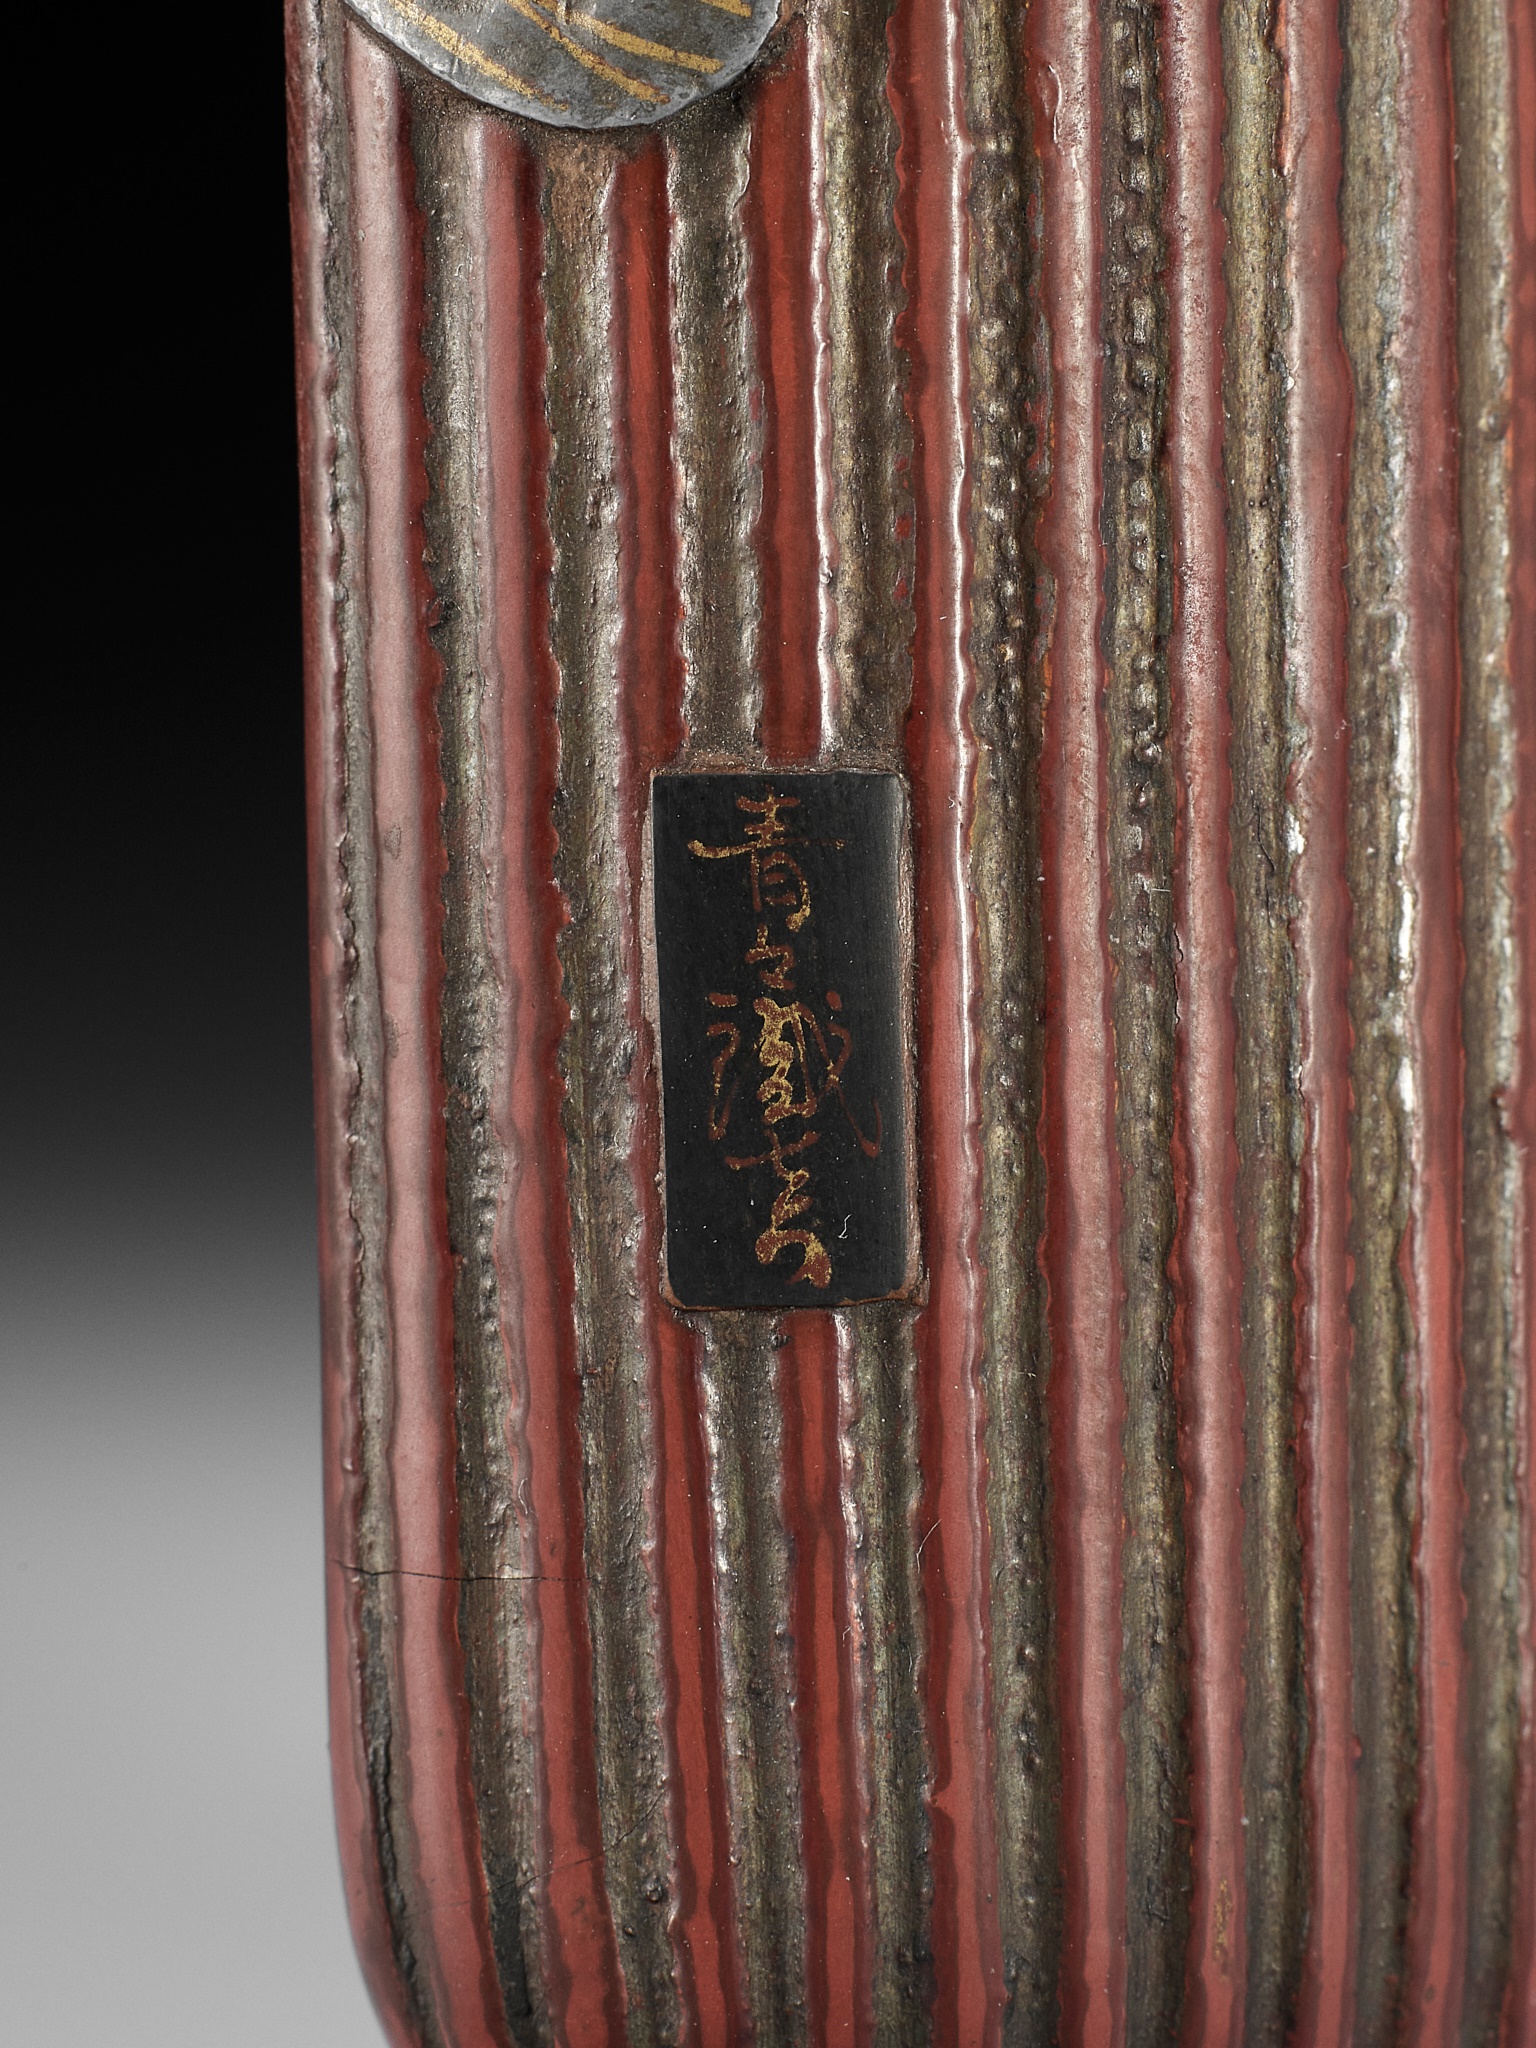 A LARGE AND RARE RINPA-STYLE INLAID AND LACQUERED KISERUZUTSU DEPICTING DRAGONFLIES - Image 9 of 9